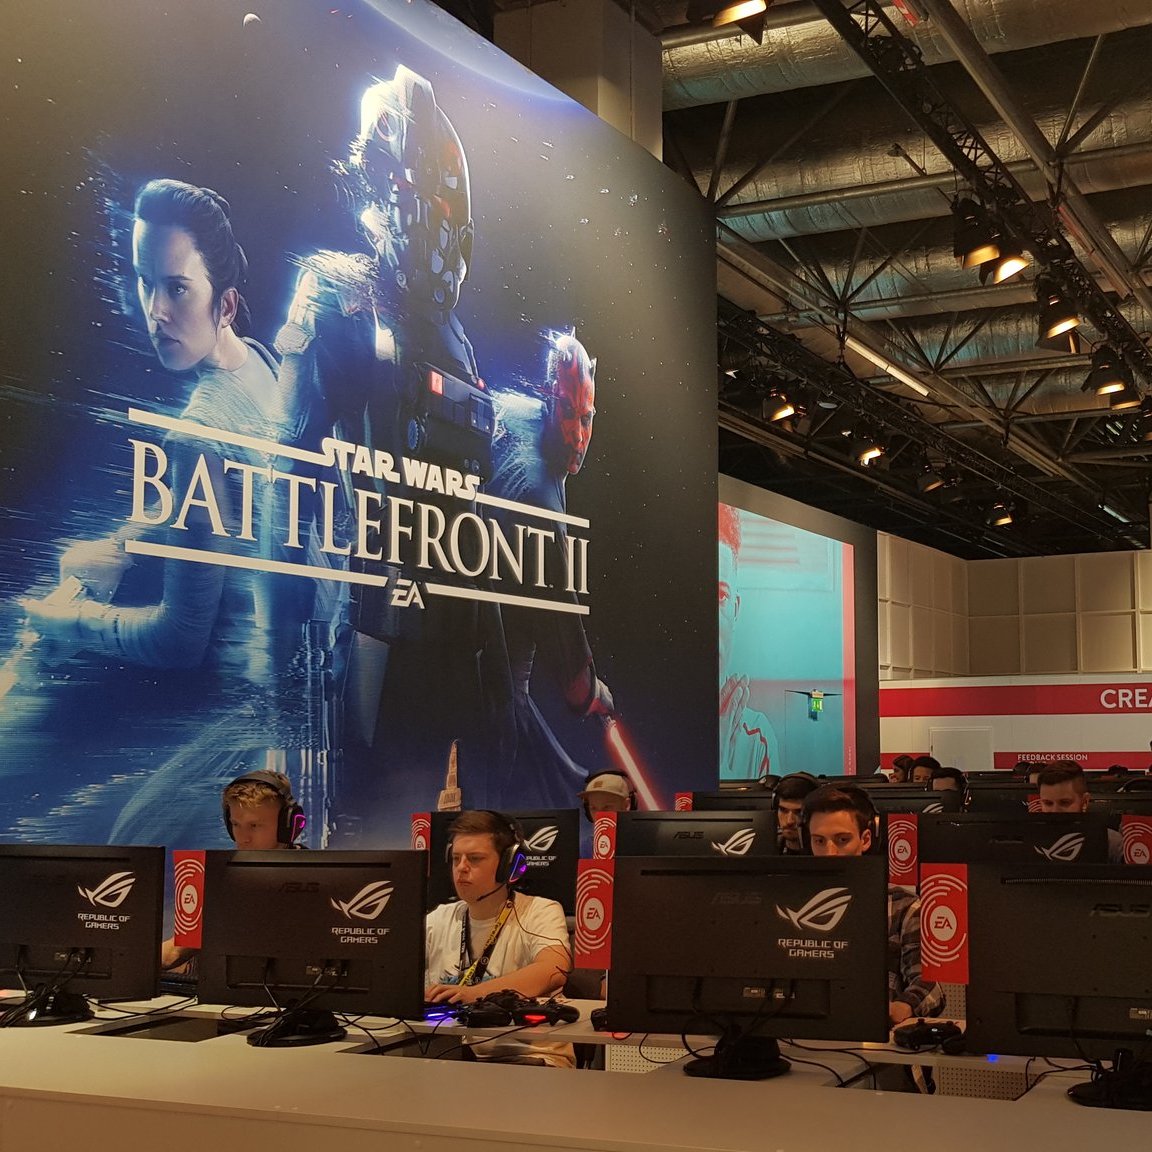 The last Battlefront event was over 4 years ago already 😭 I thought by now we'd get a lot more at Gamescom for Star Wars games